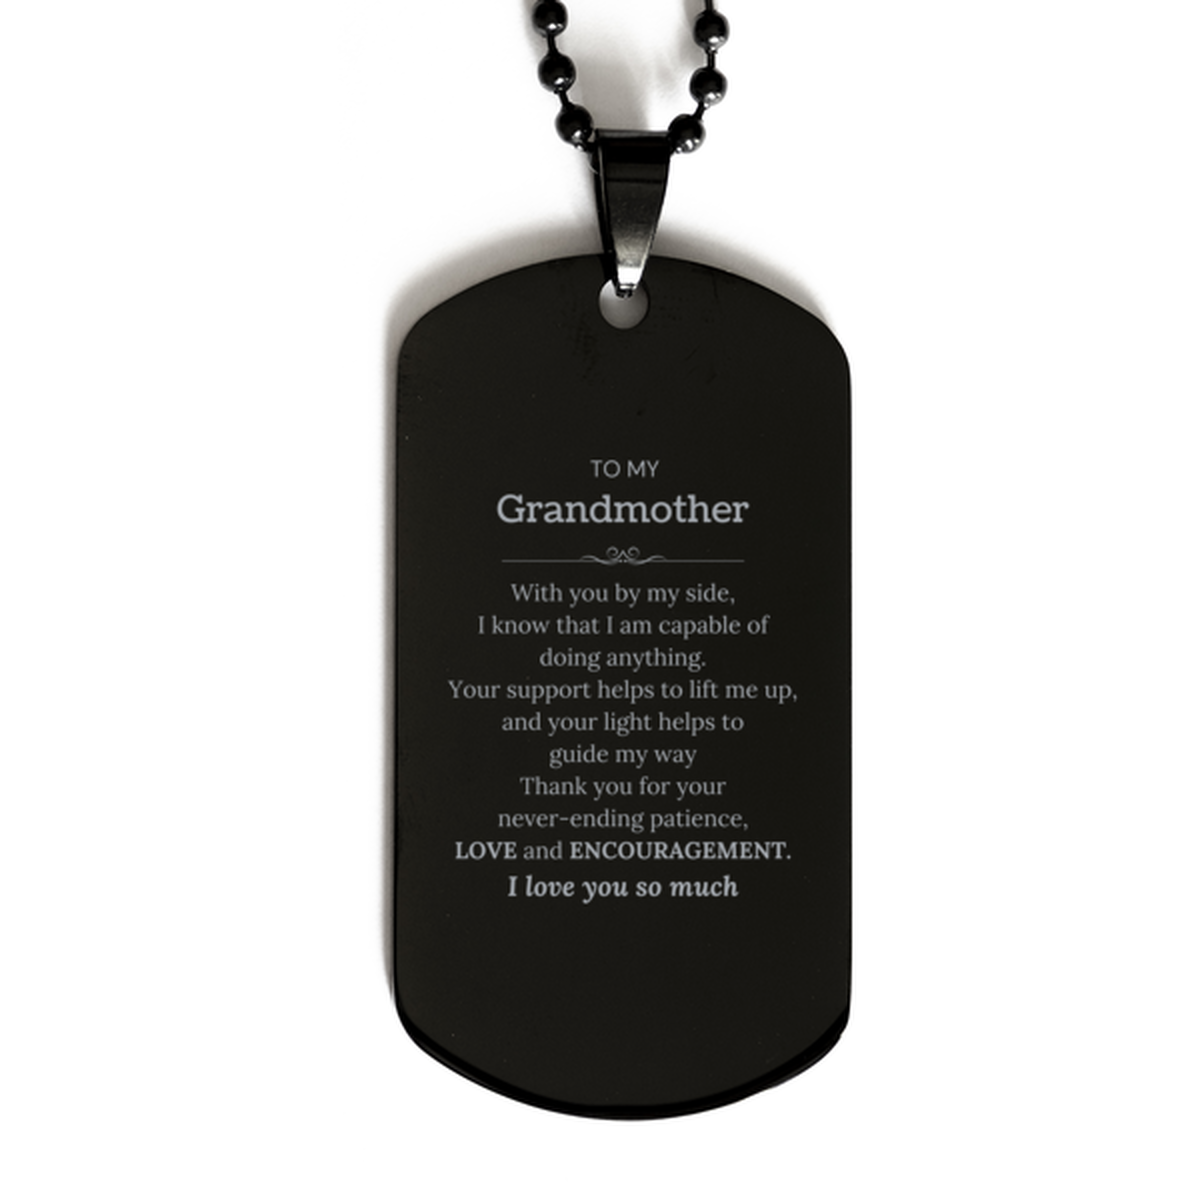 Appreciation Grandmother Black Dog Tag Gifts, To My Grandmother Birthday Christmas Wedding Keepsake Gifts for Grandmother With you by my side, I know that I am capable of doing anything. I love you so much